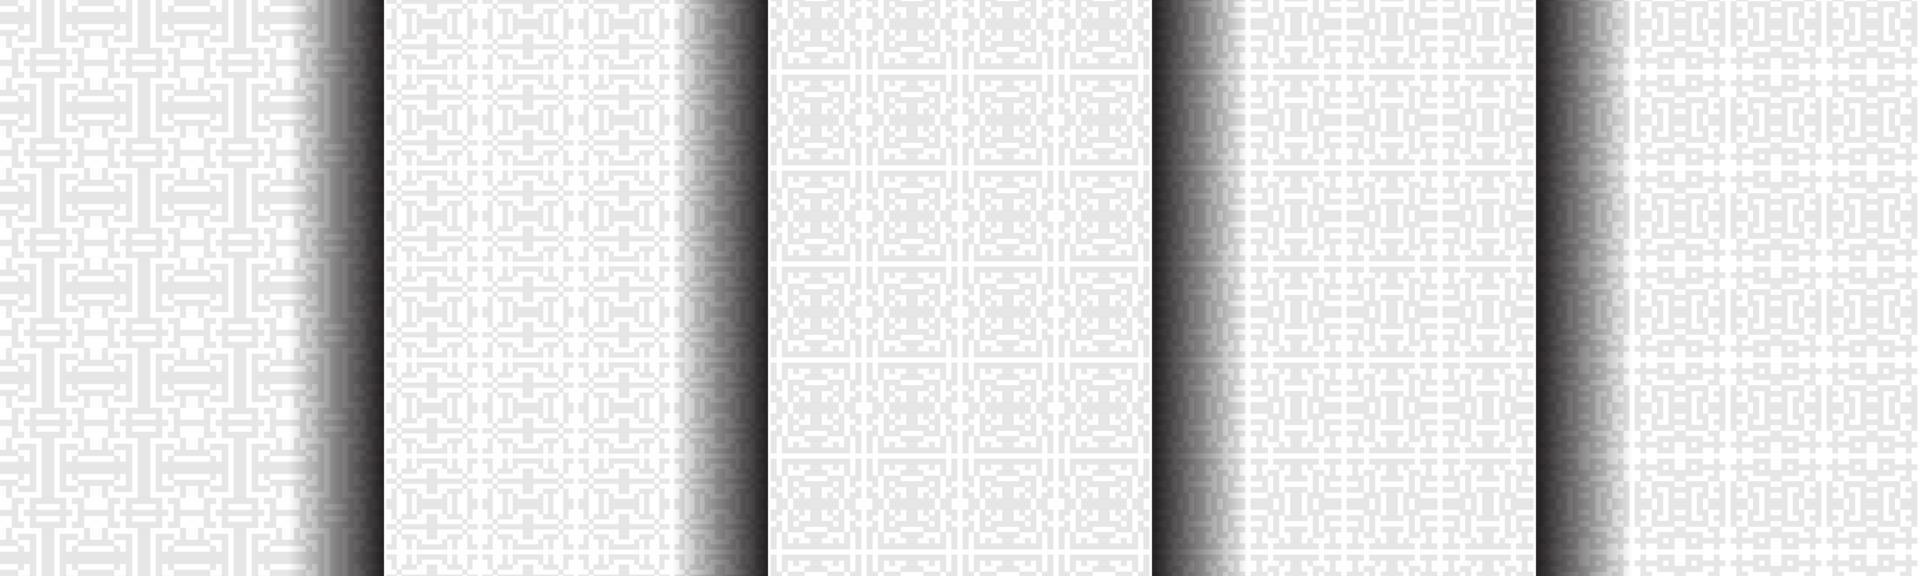 a collection of modern geometric gray background patterns collection for banners, flyers, posters, papers, etc vector